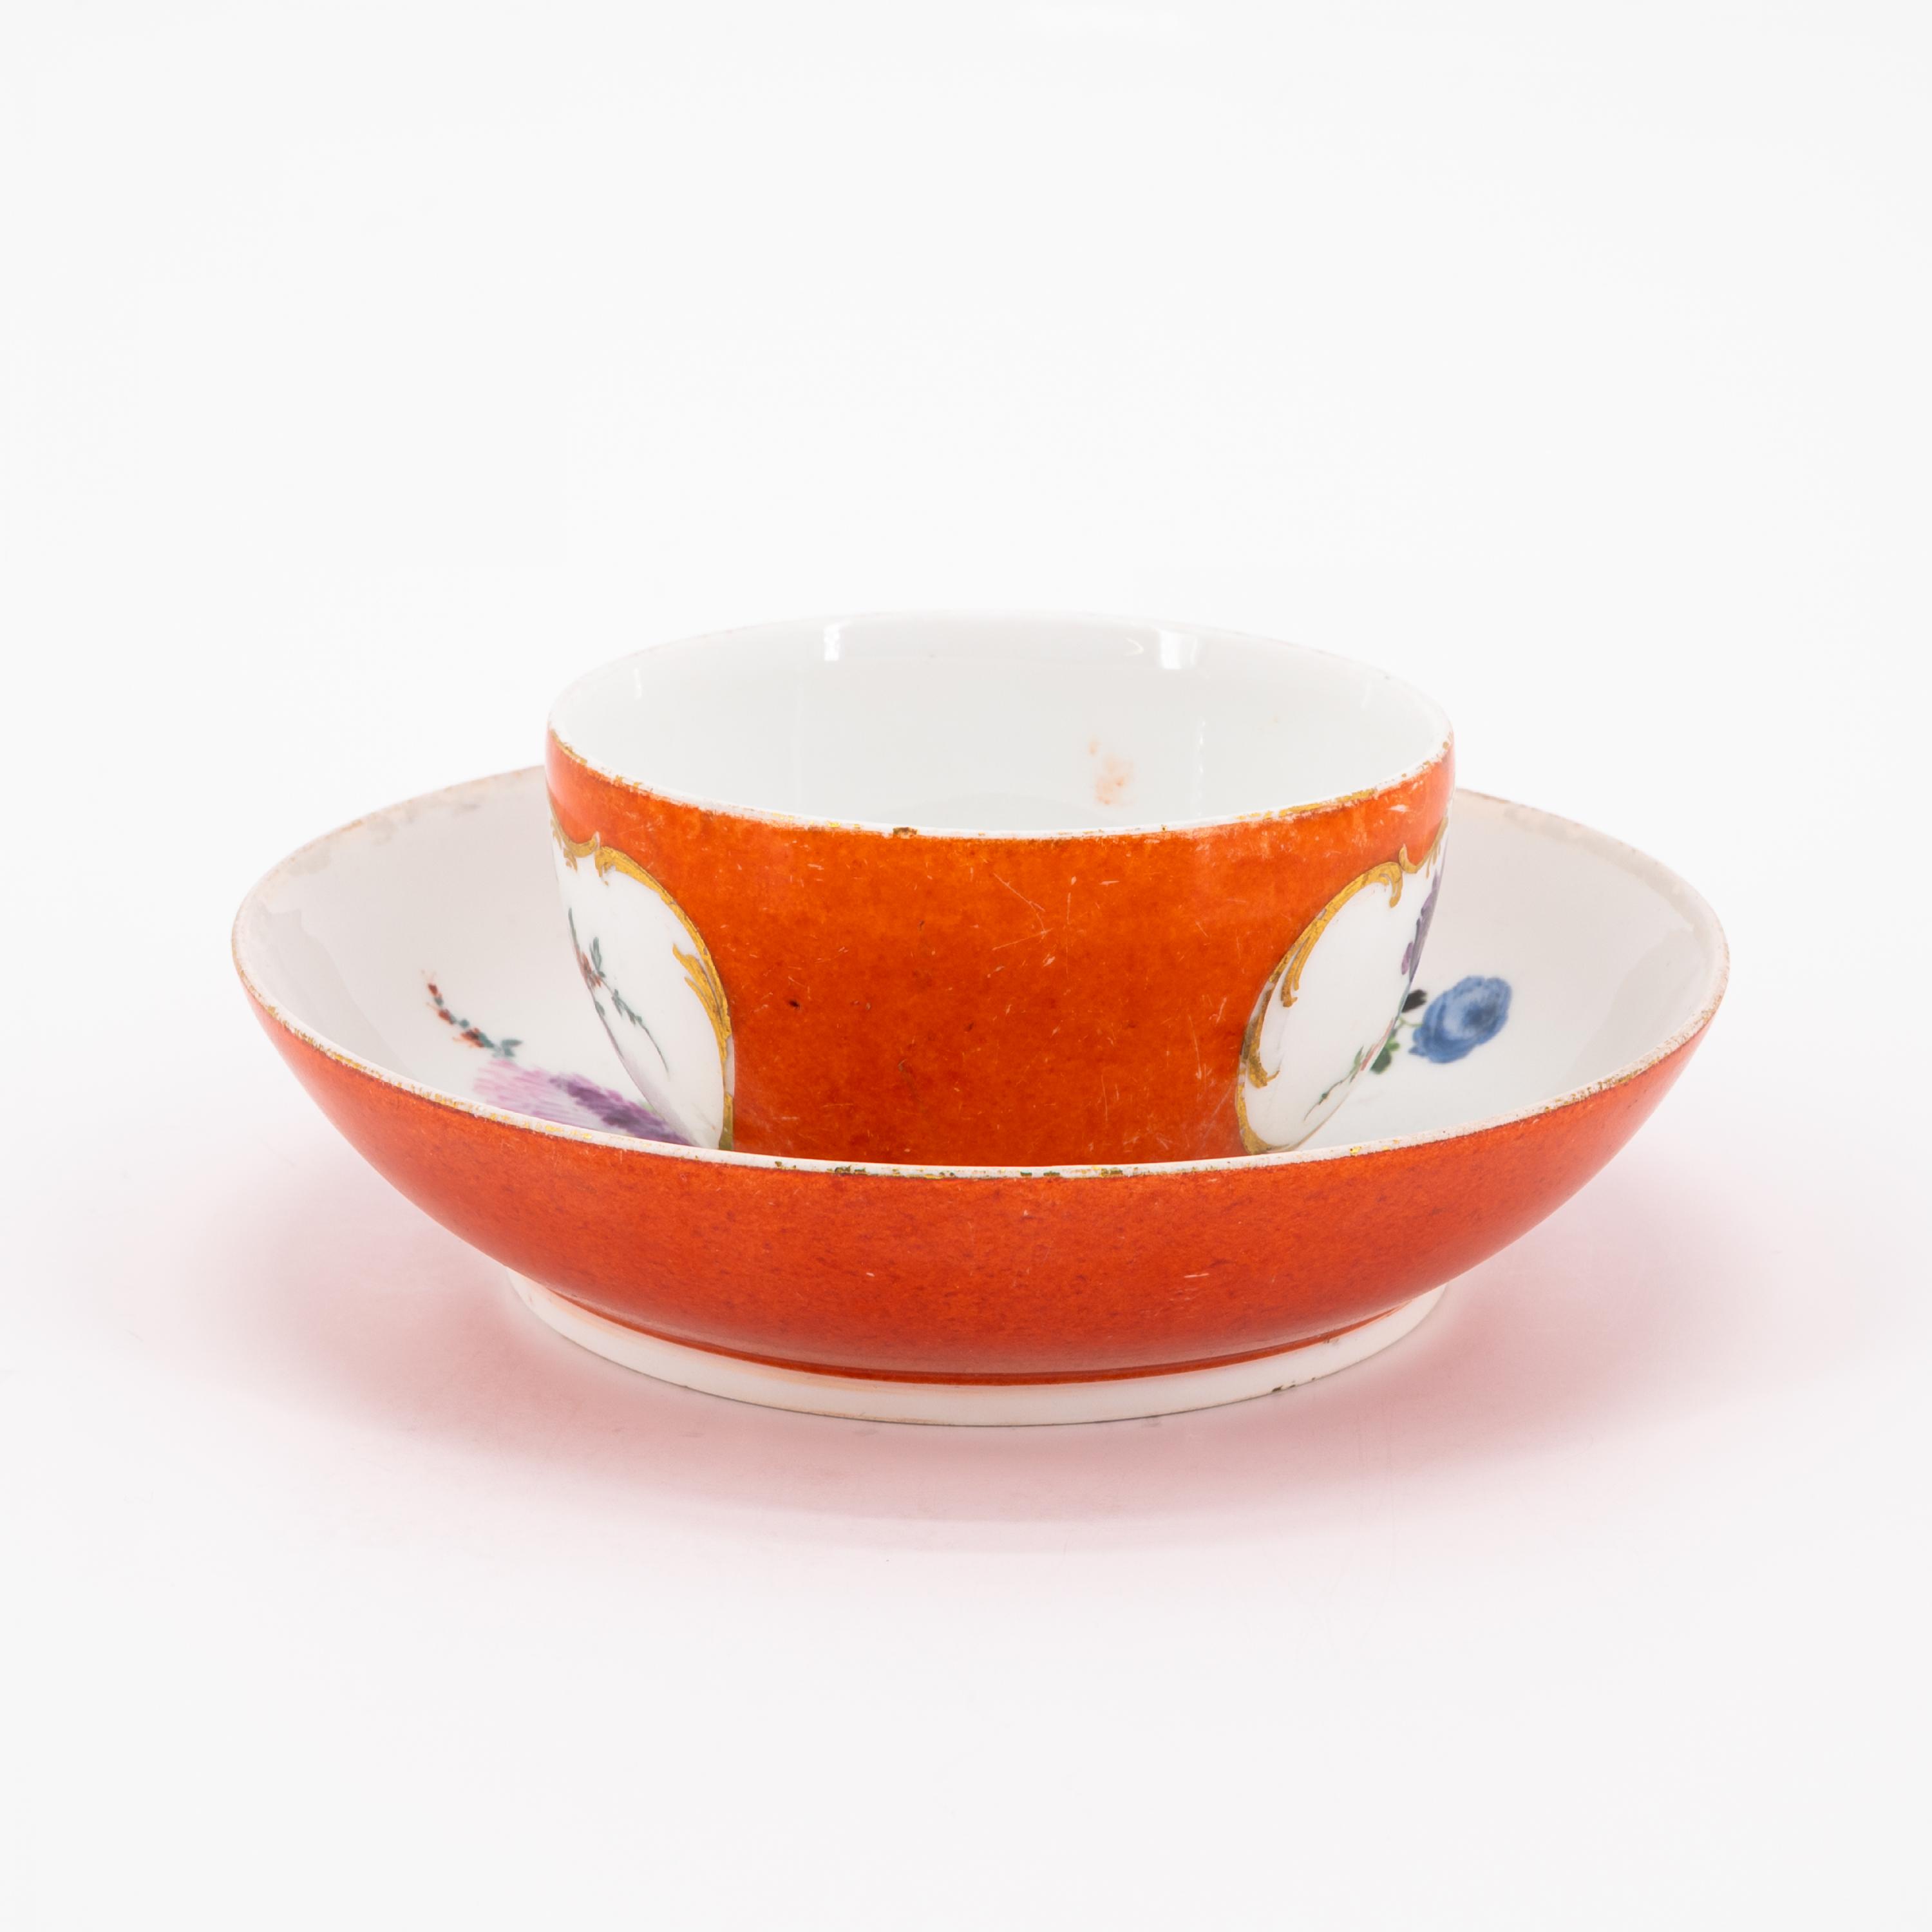 TWO PORCELAIN CUPS AND SAUCERS WITH YELLOW AND ORANGE COLOURED GROUND AS WELL AS FLORAL DECOR - Image 9 of 11